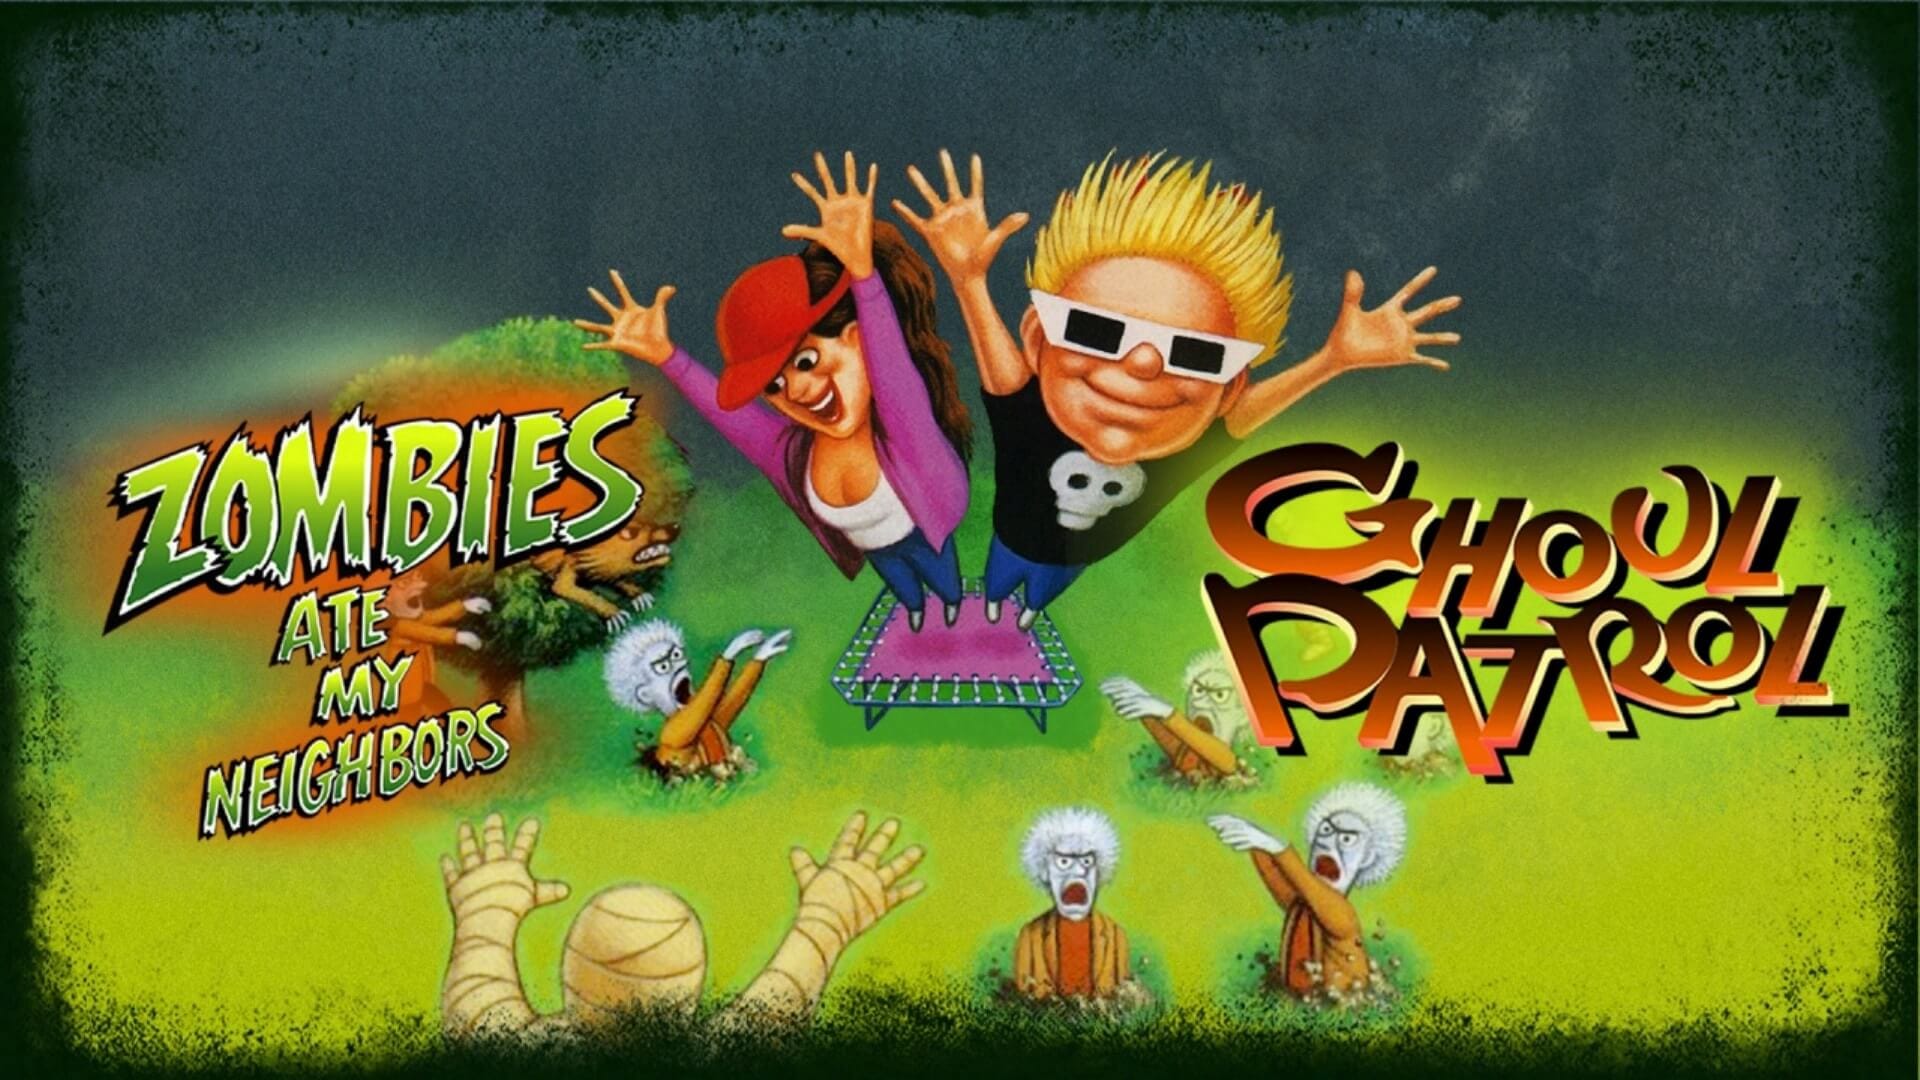 A banner image featuring LucasArts SNES classics Zombies Ate My Neighbors and Ghoul Patrol